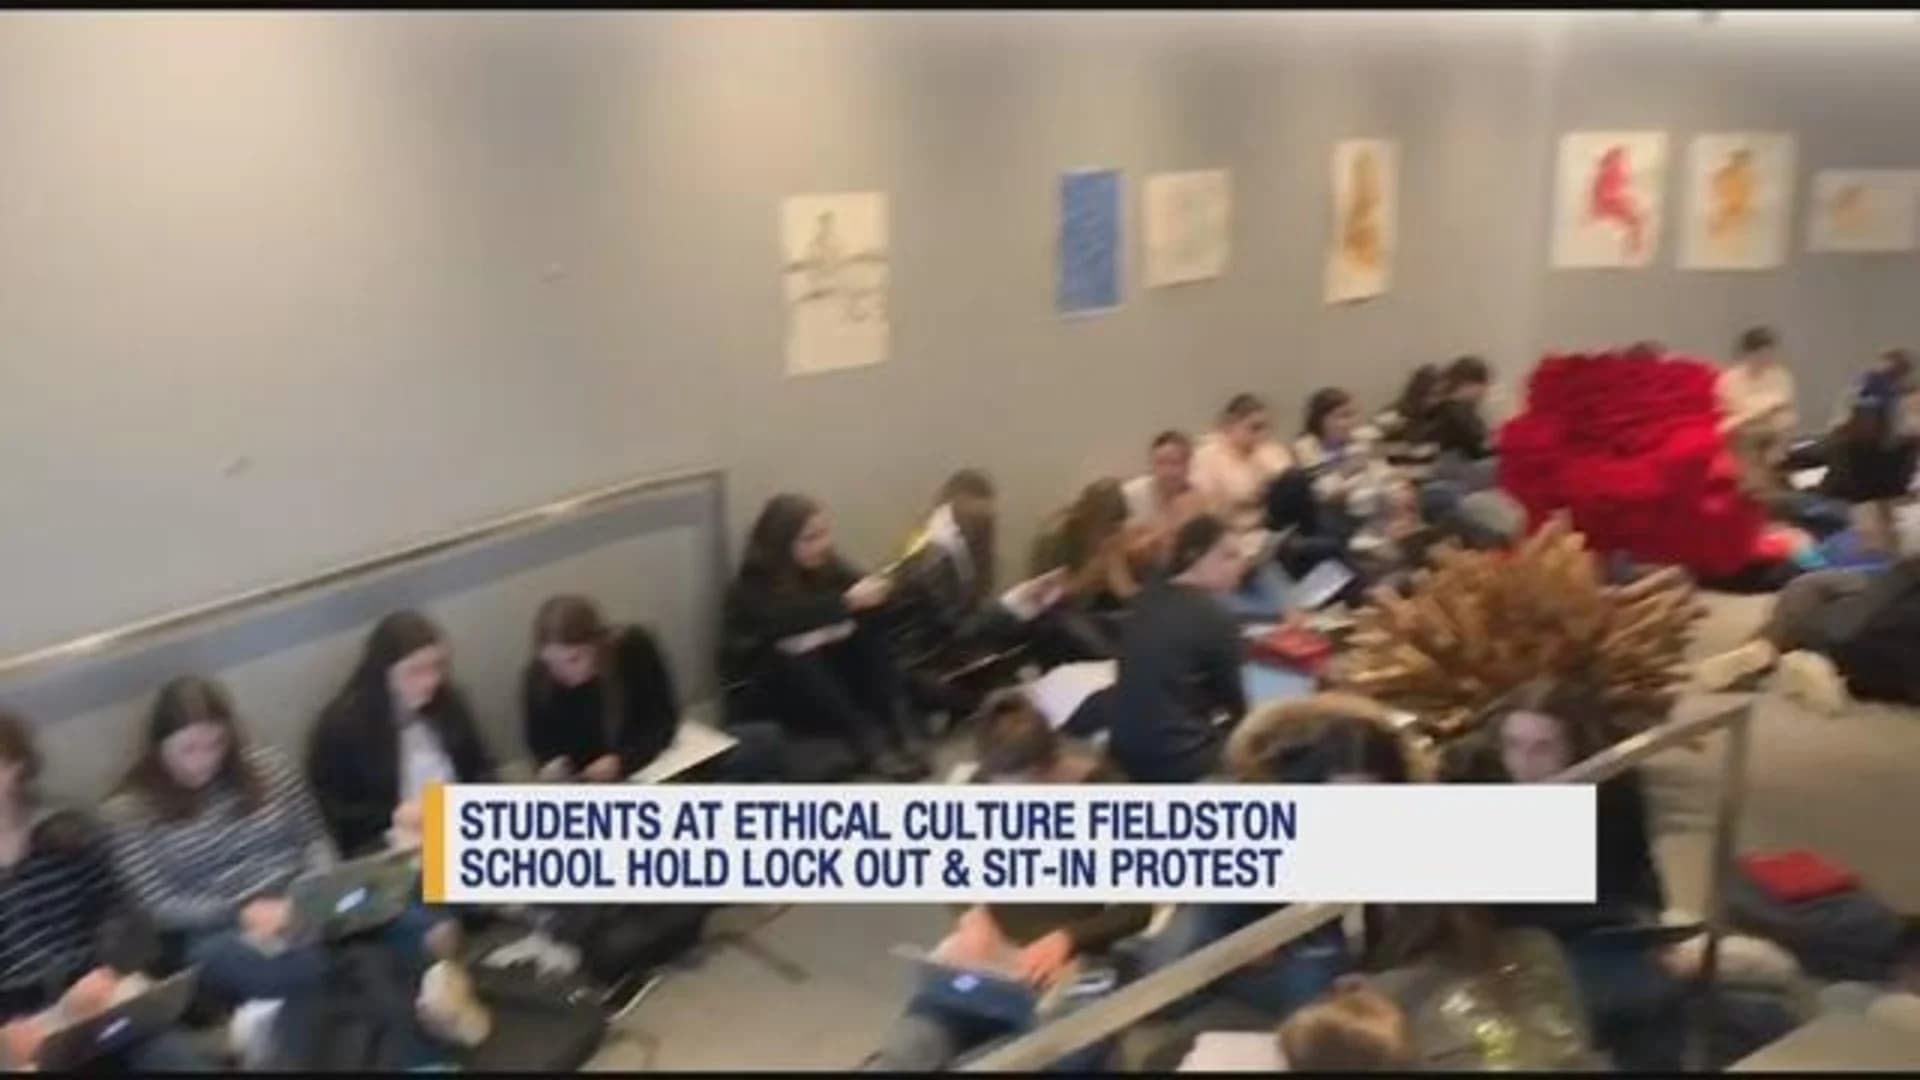 Students protest racism in schools with sit-in movement